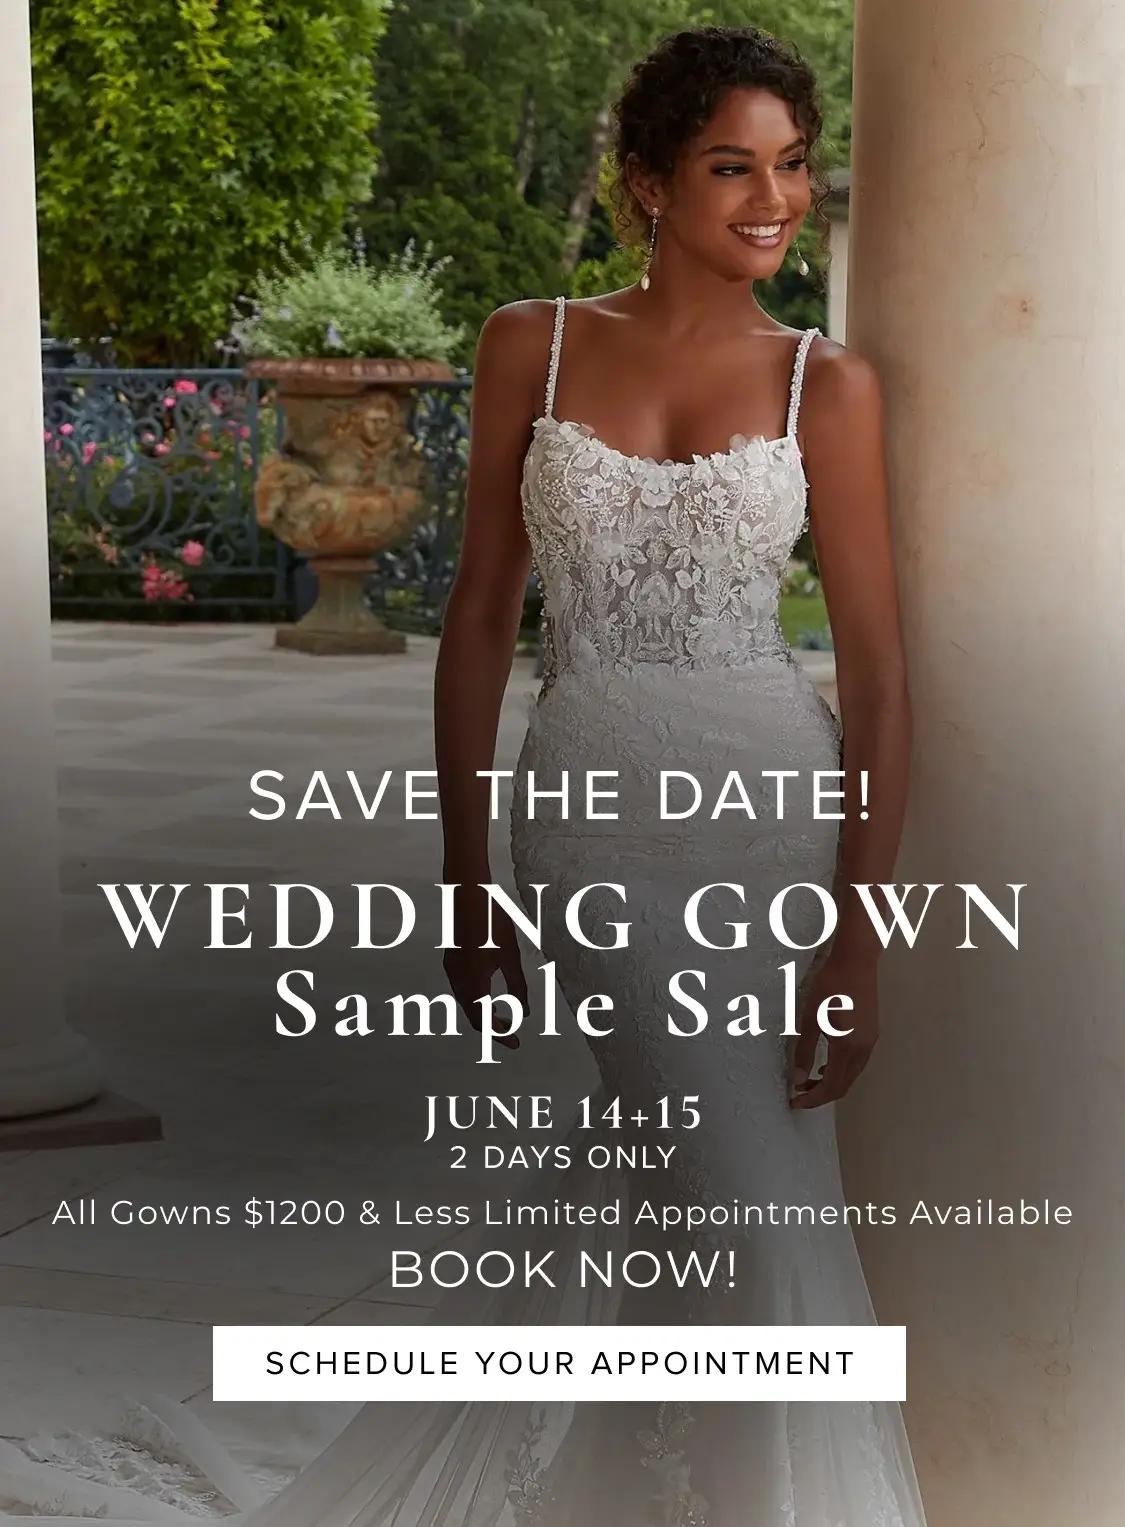 Wedding Gowns Sample Sale Mobile Banner